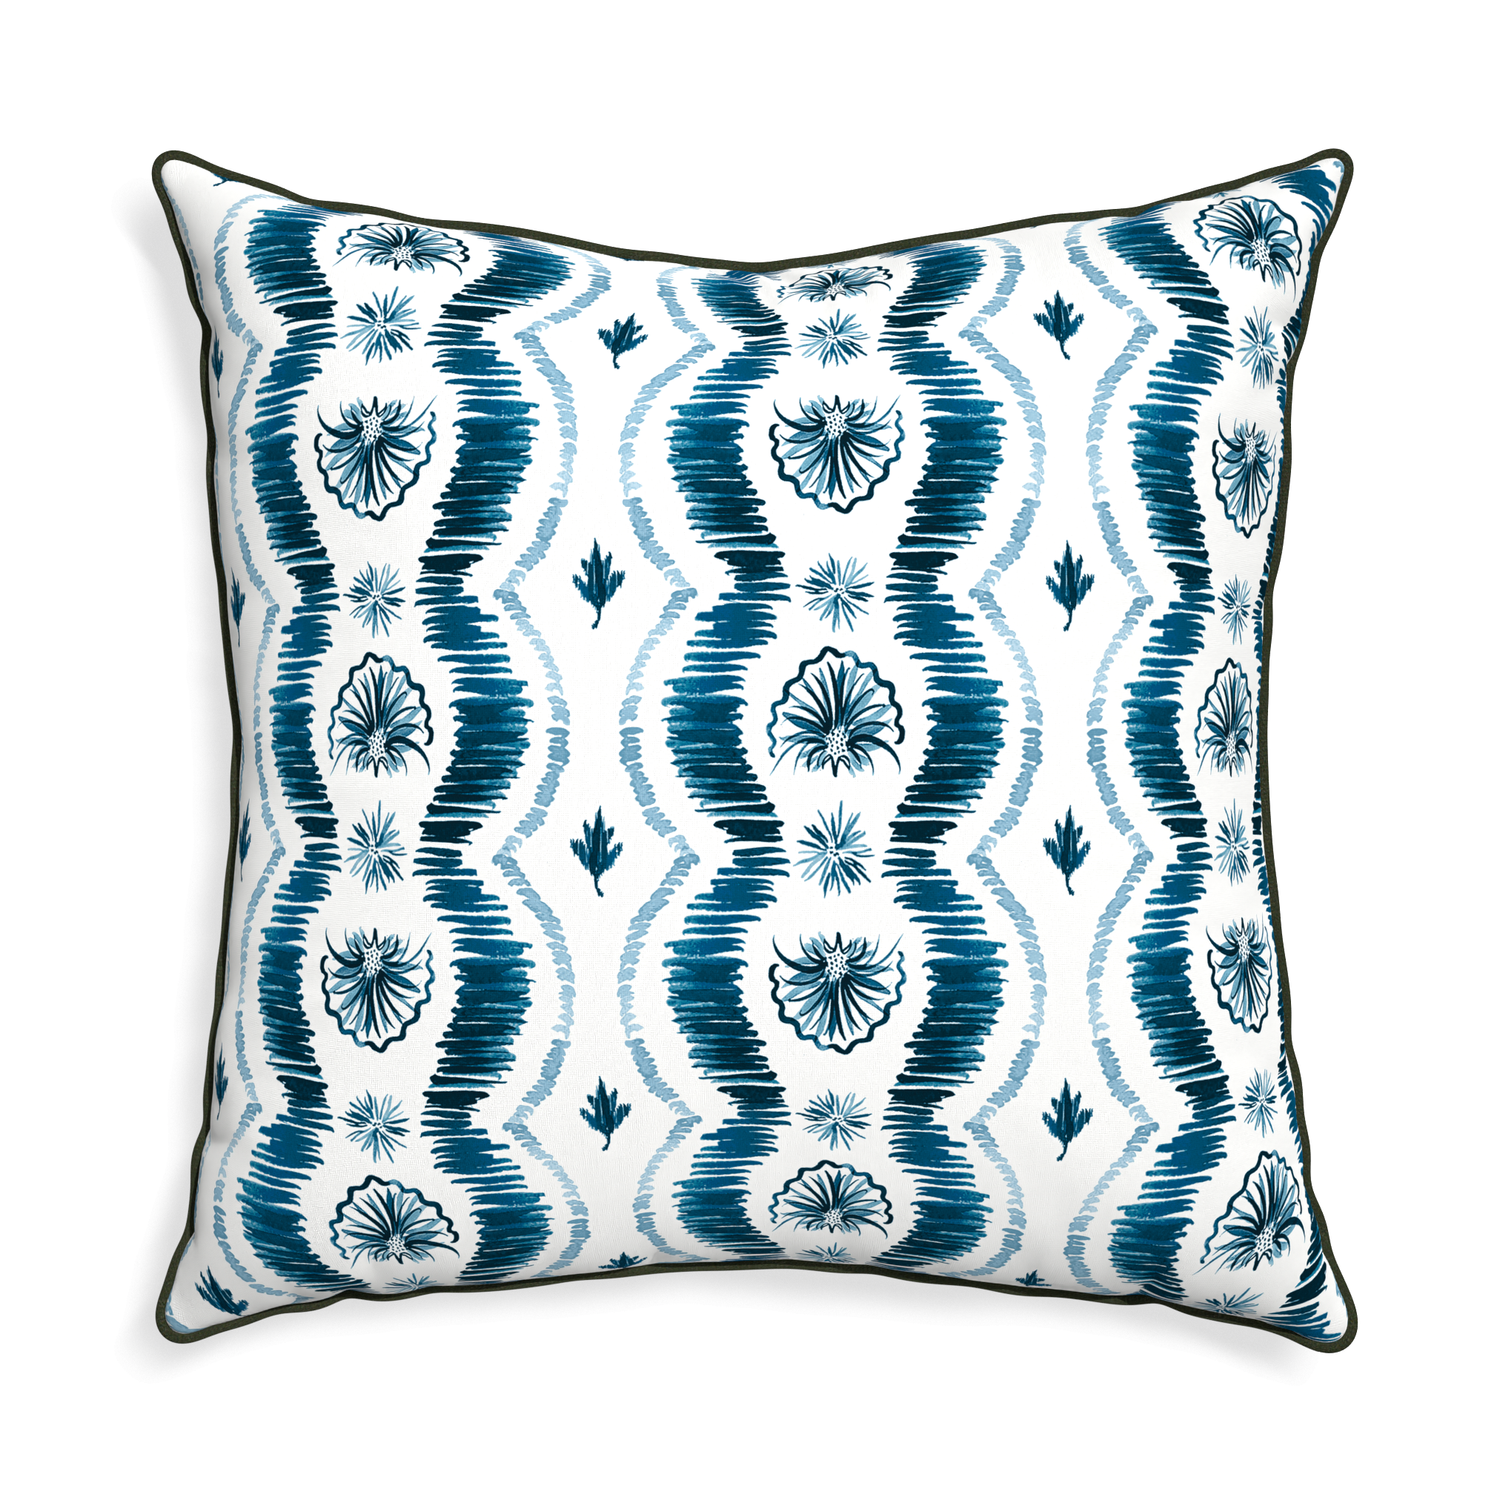 Euro-sham alice custom blue ikatpillow with f piping on white background